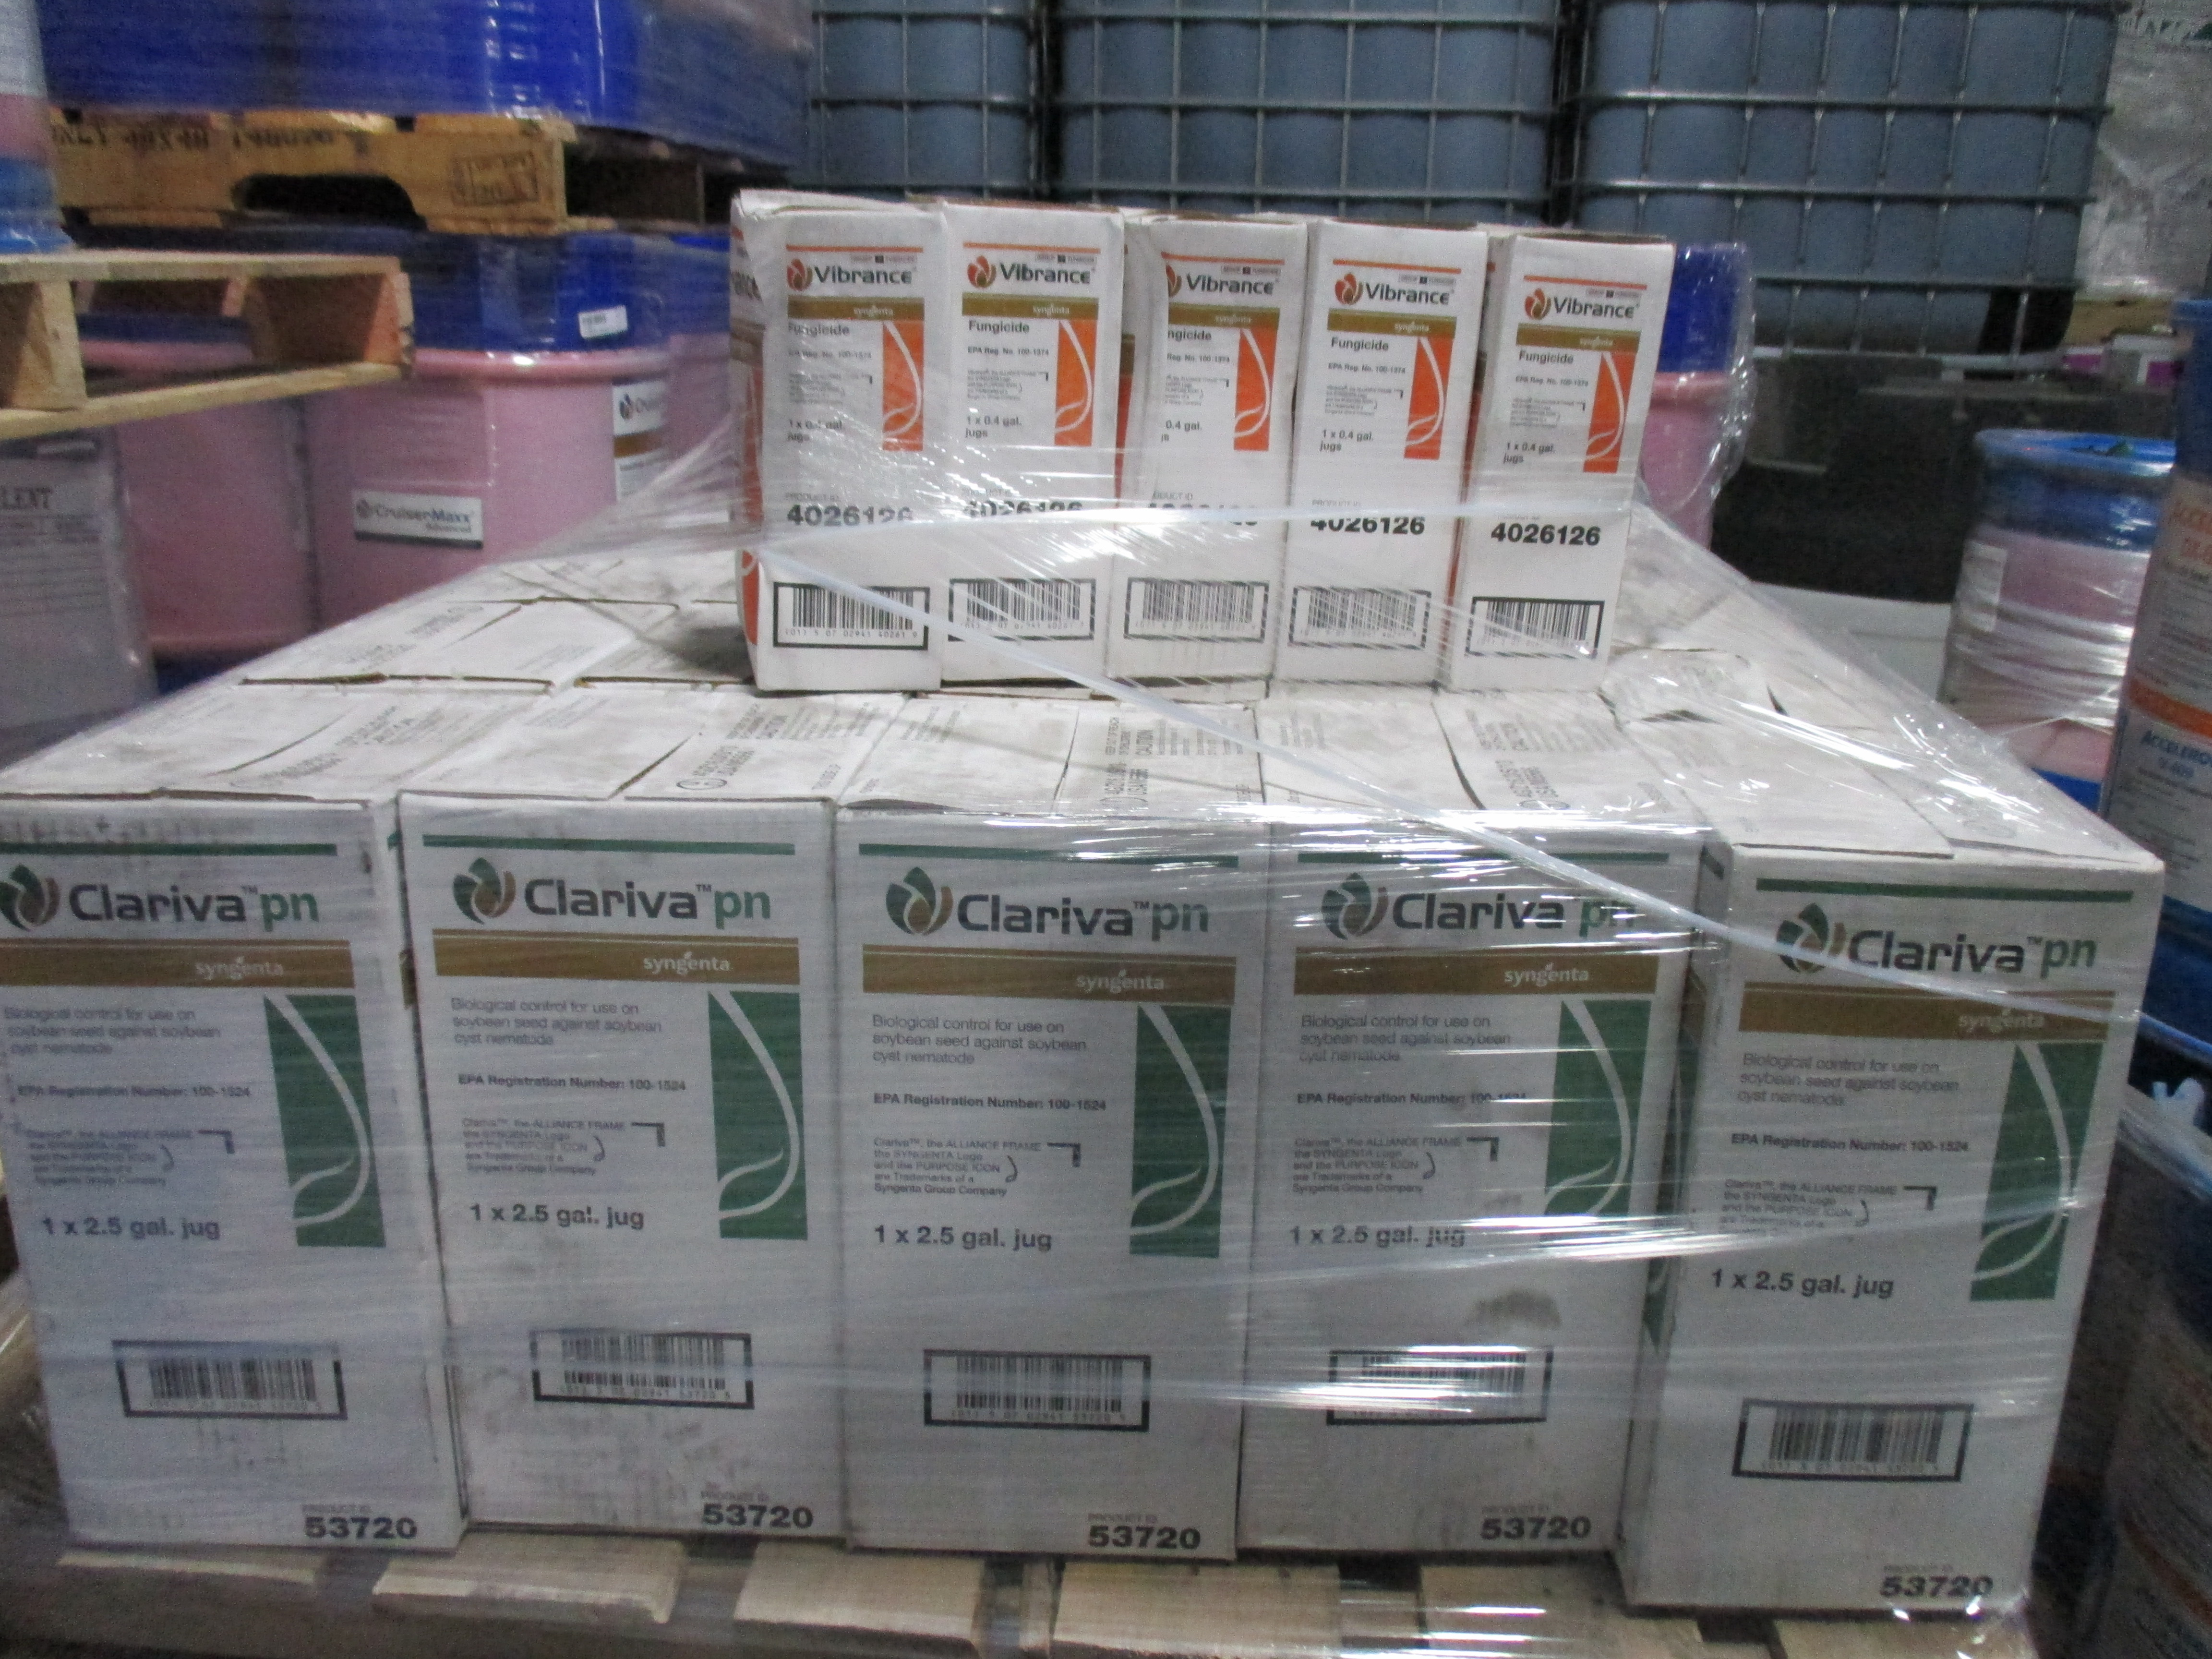 Photo shows a pallet of small package pesticides at a facility. 